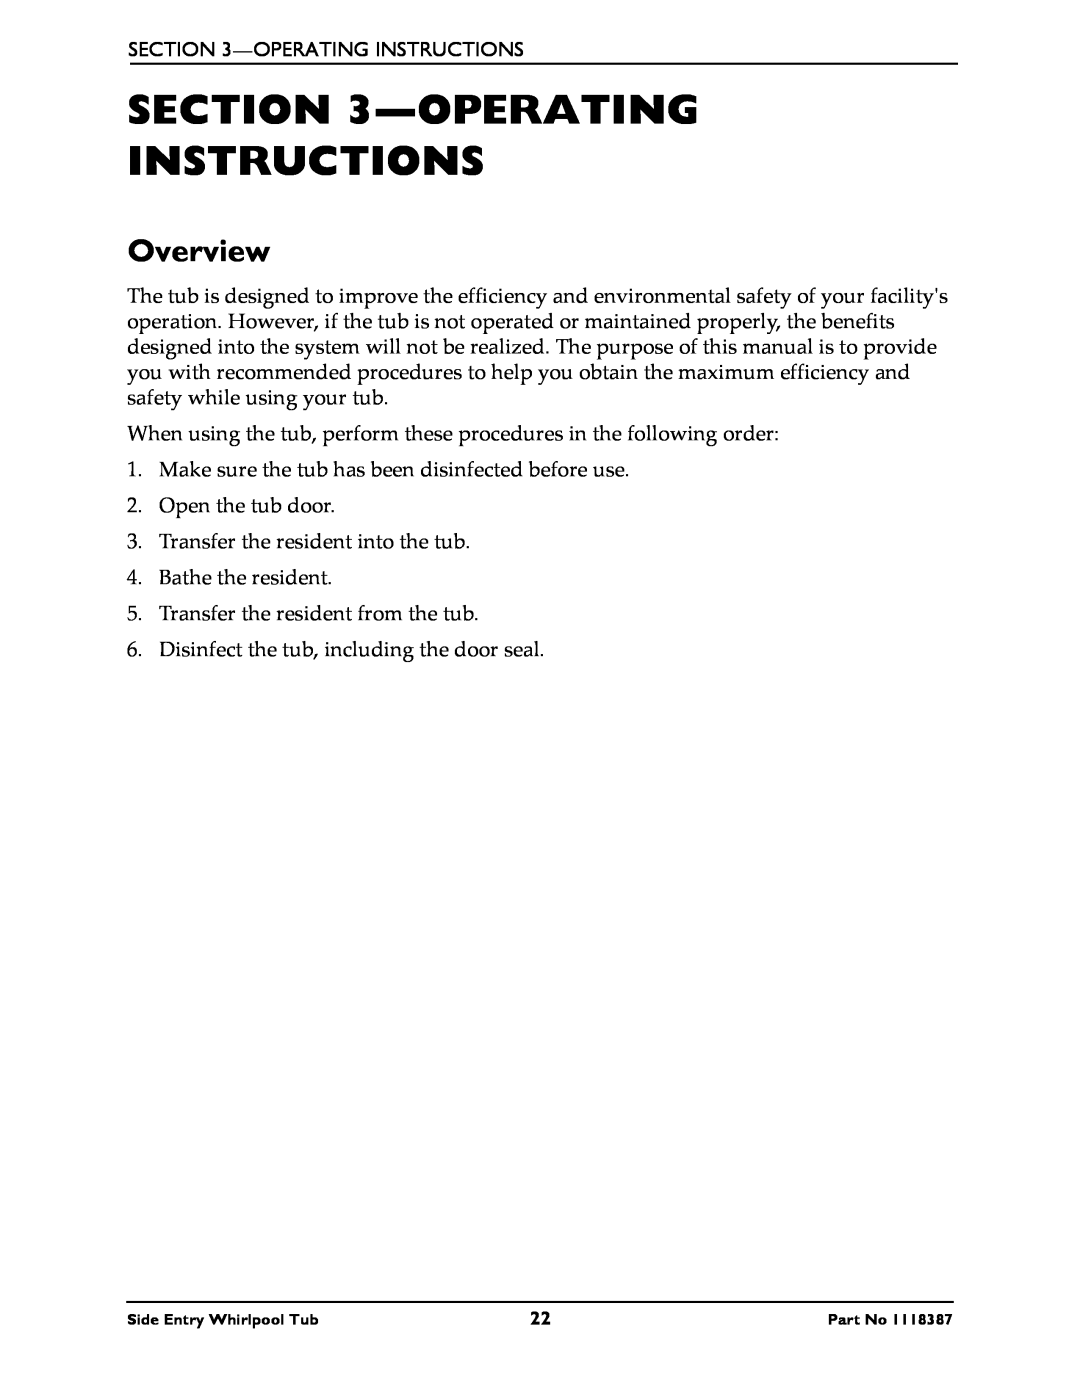 Invacare 3650 manual Operating Instructions, Overview 